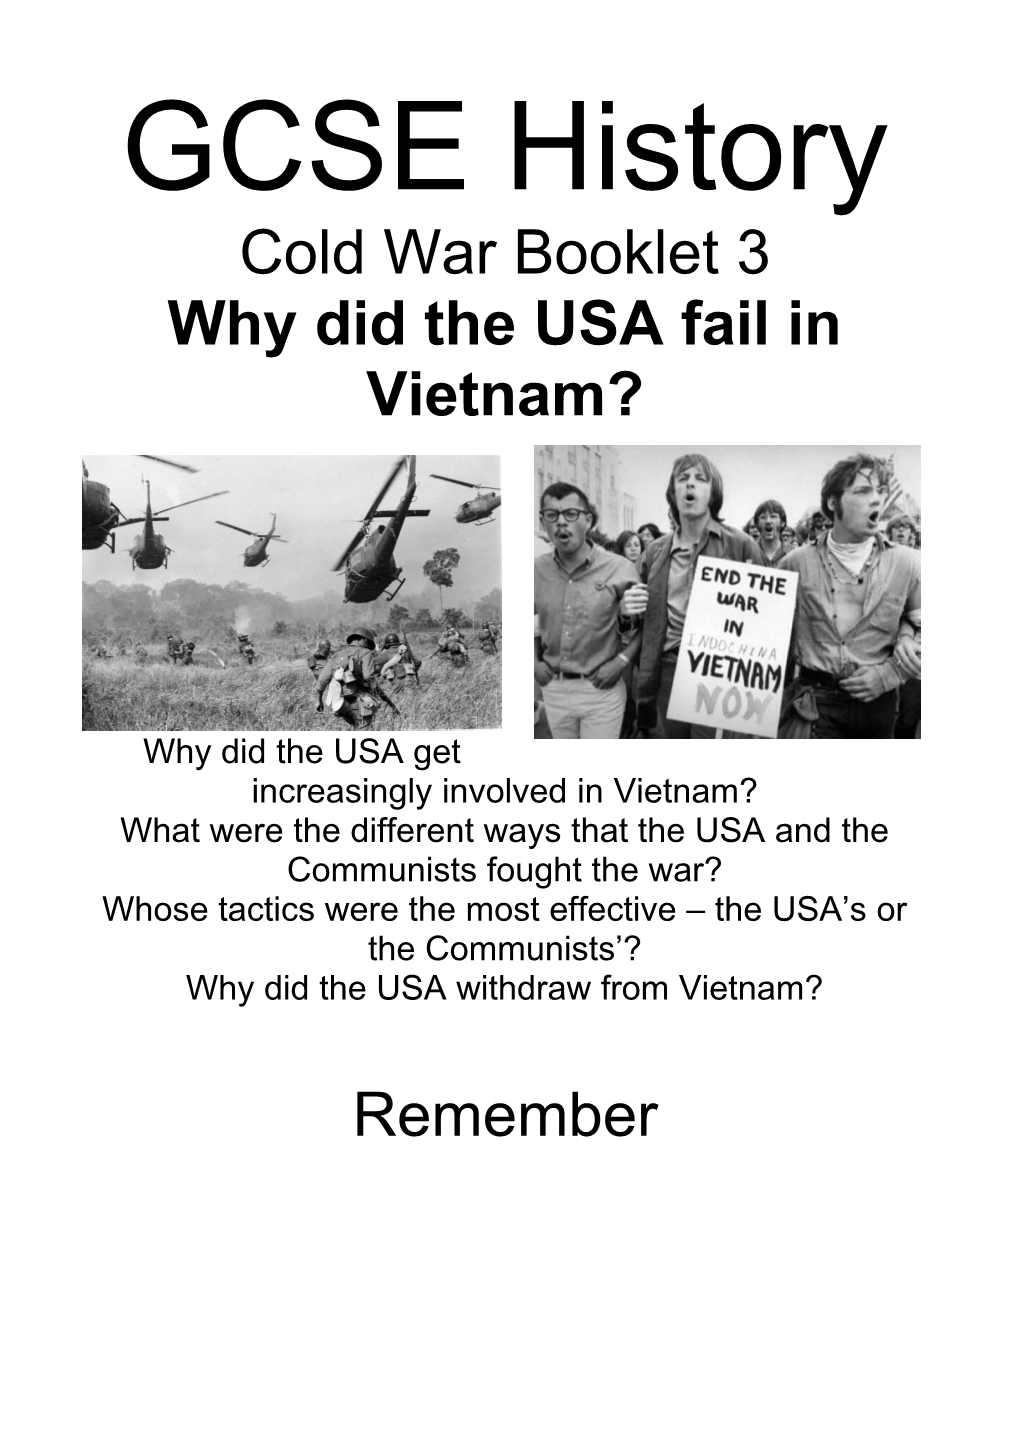 Why Did the USA Fail in Vietnam?